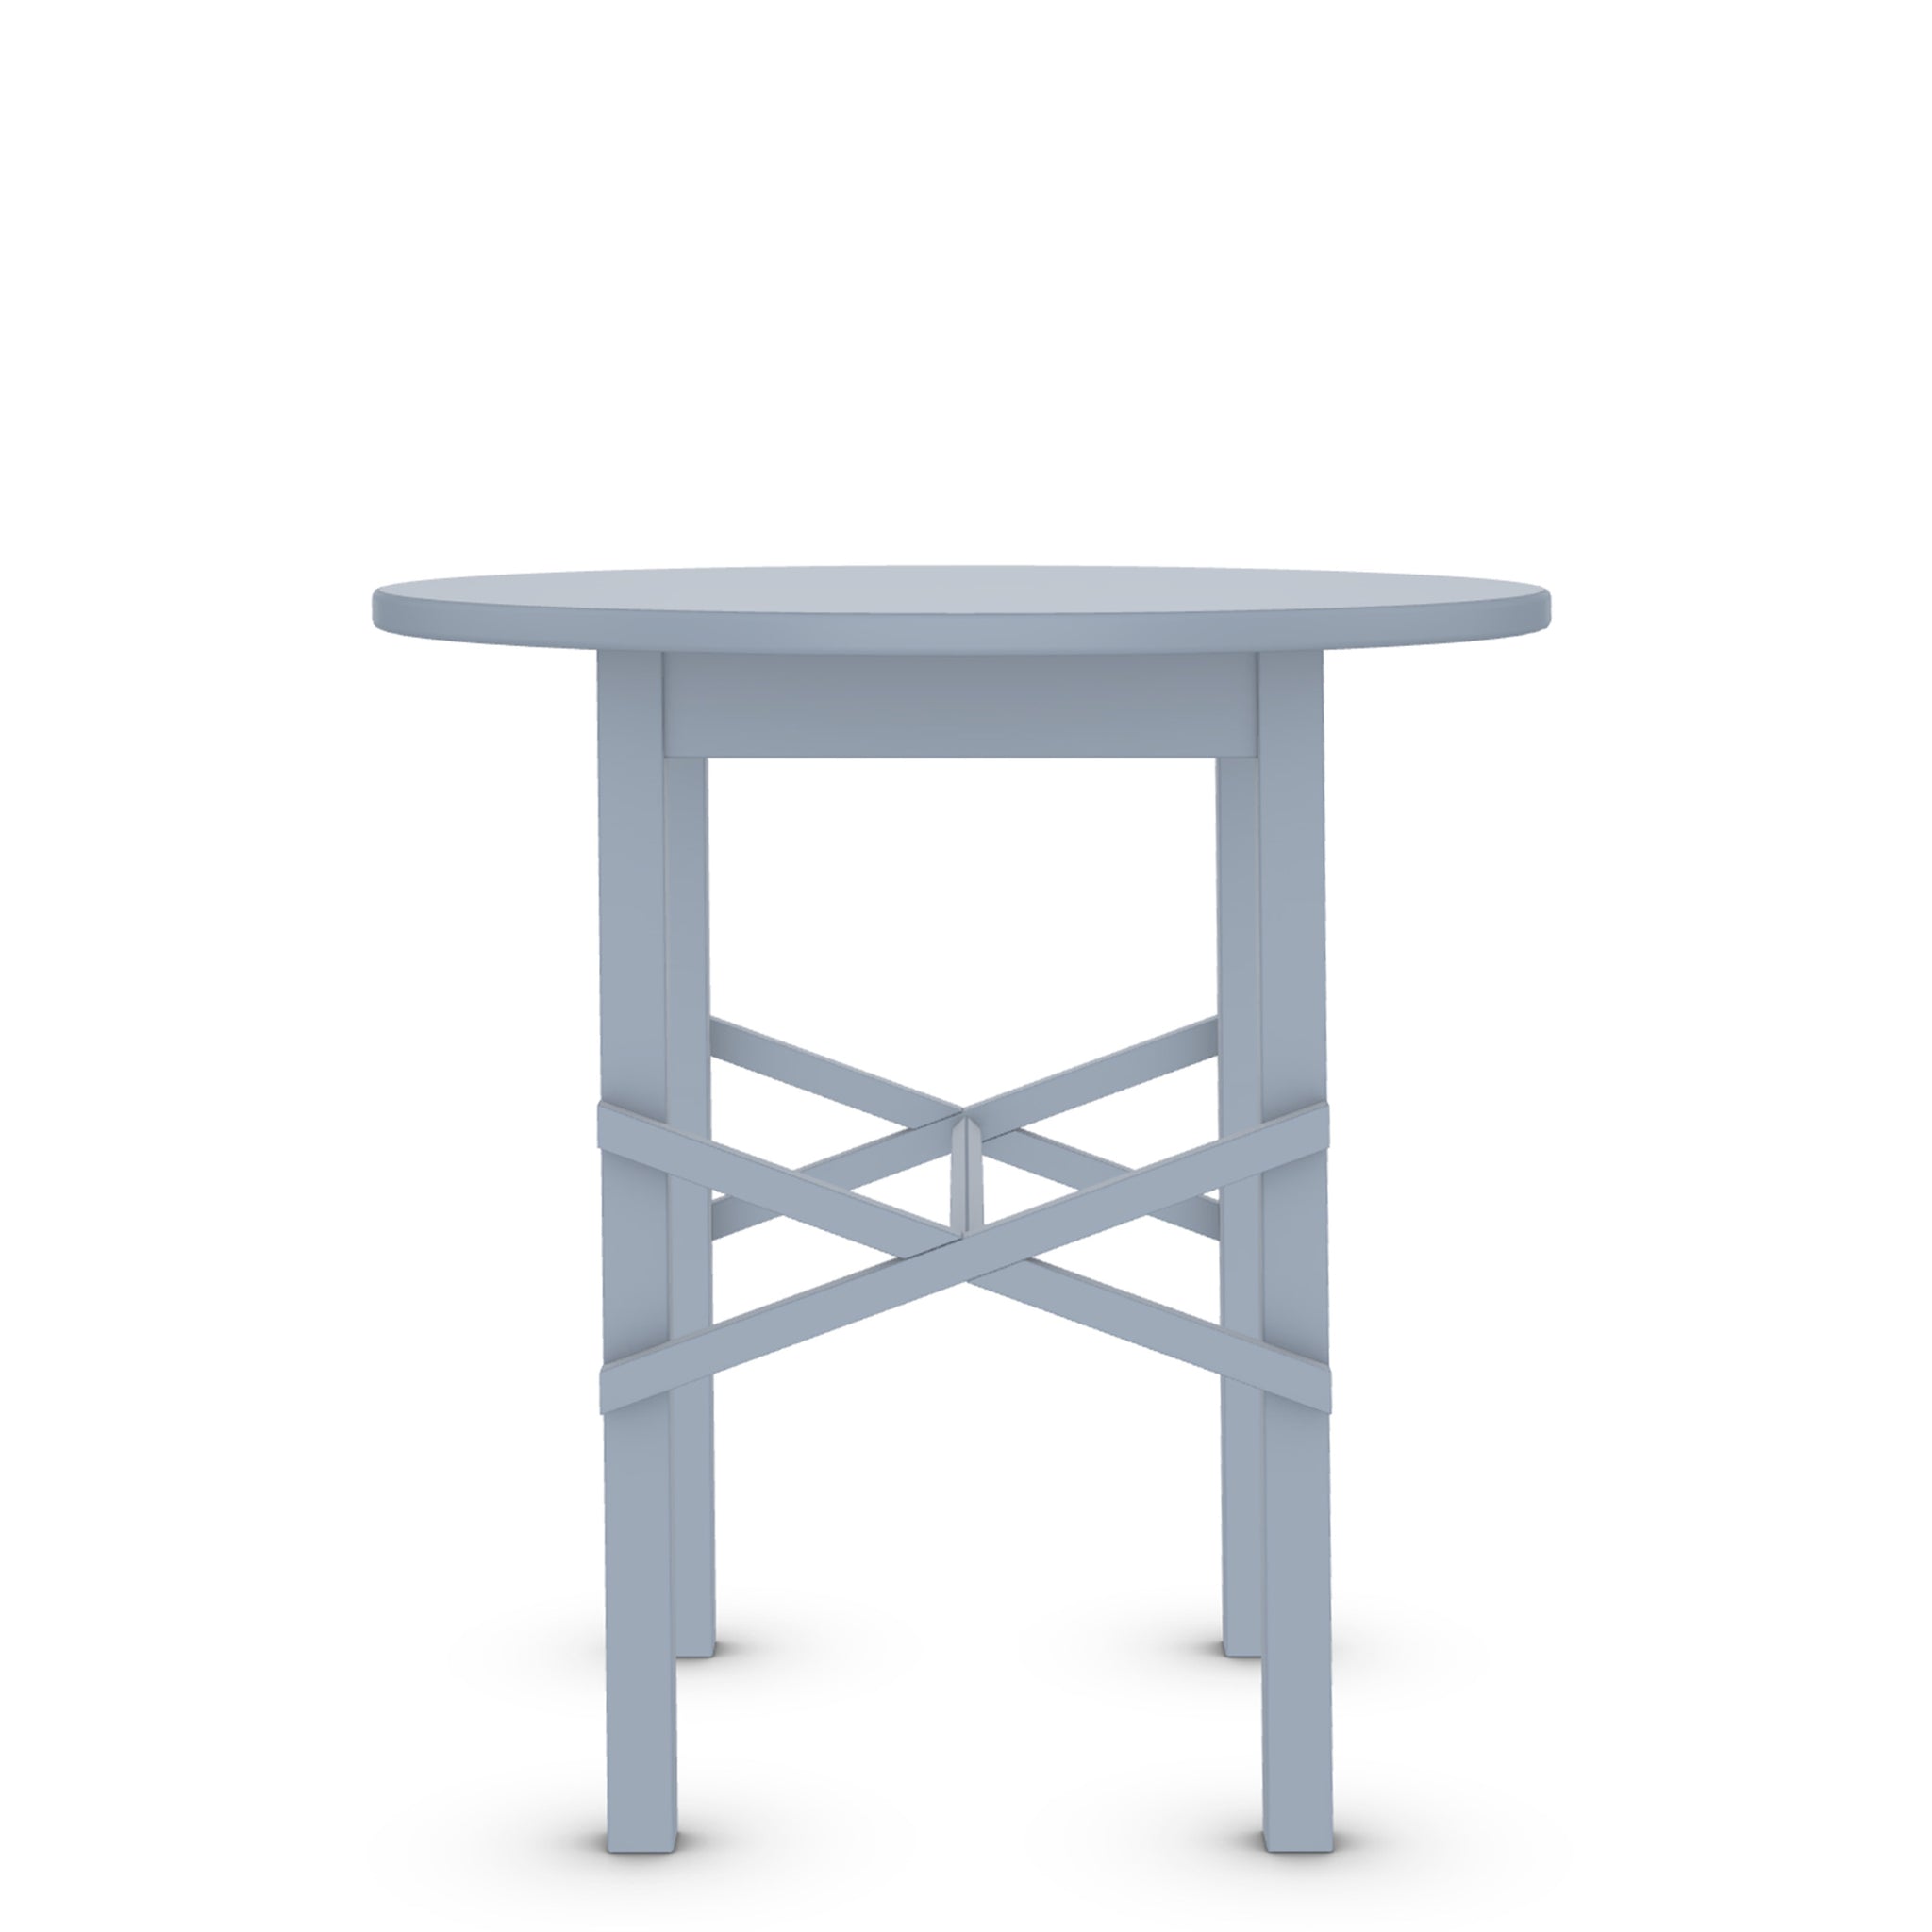 Maine Cottage Classic Cottage Sofa Table by Maine Cottage | Where Color Lives 